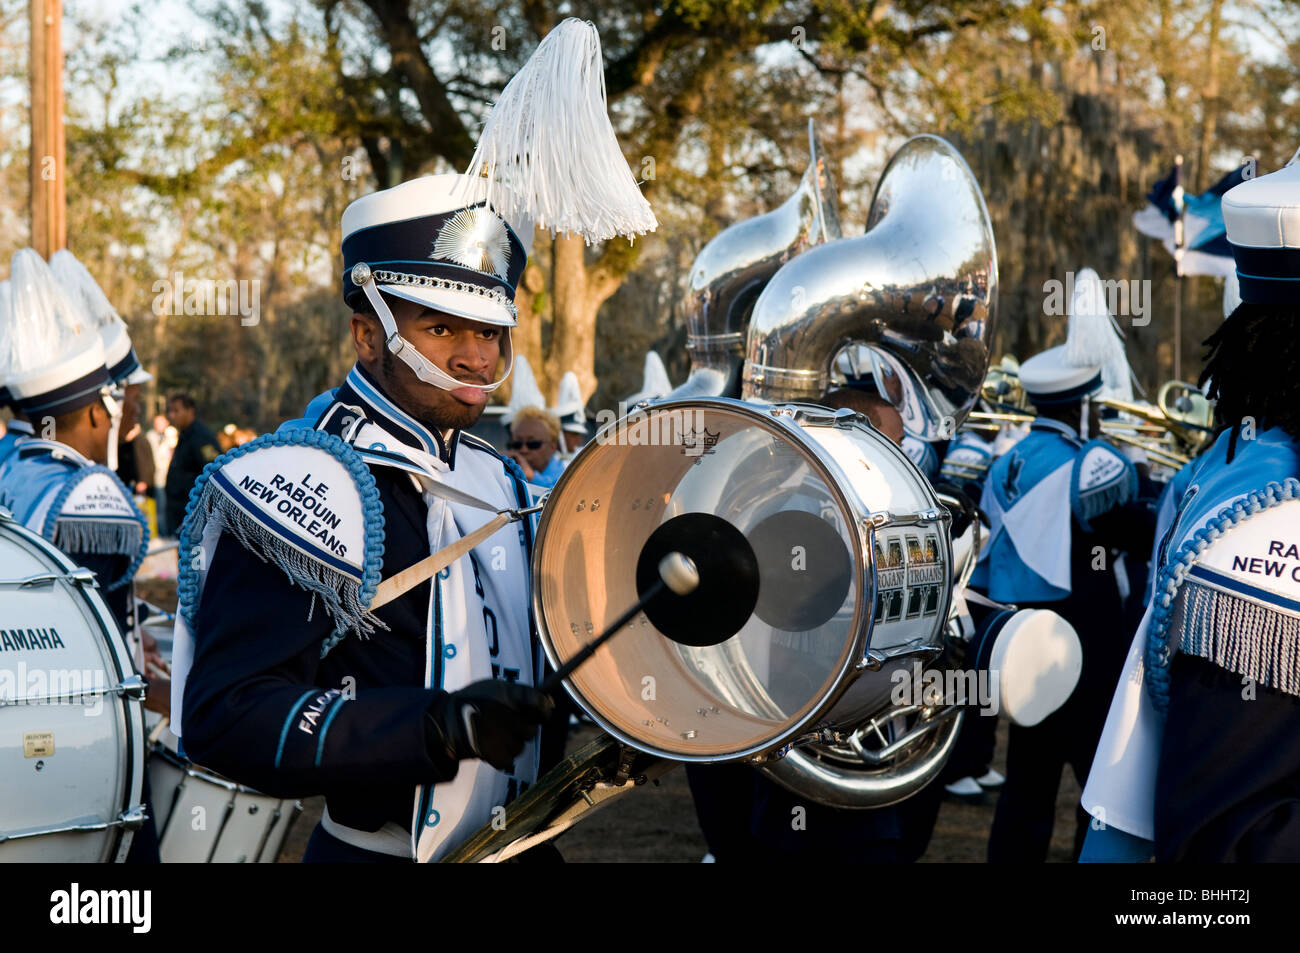 Staging-Bereich des Endymion mit marching Band, Karneval 2010, New Orleans, Louisiana Stockfoto